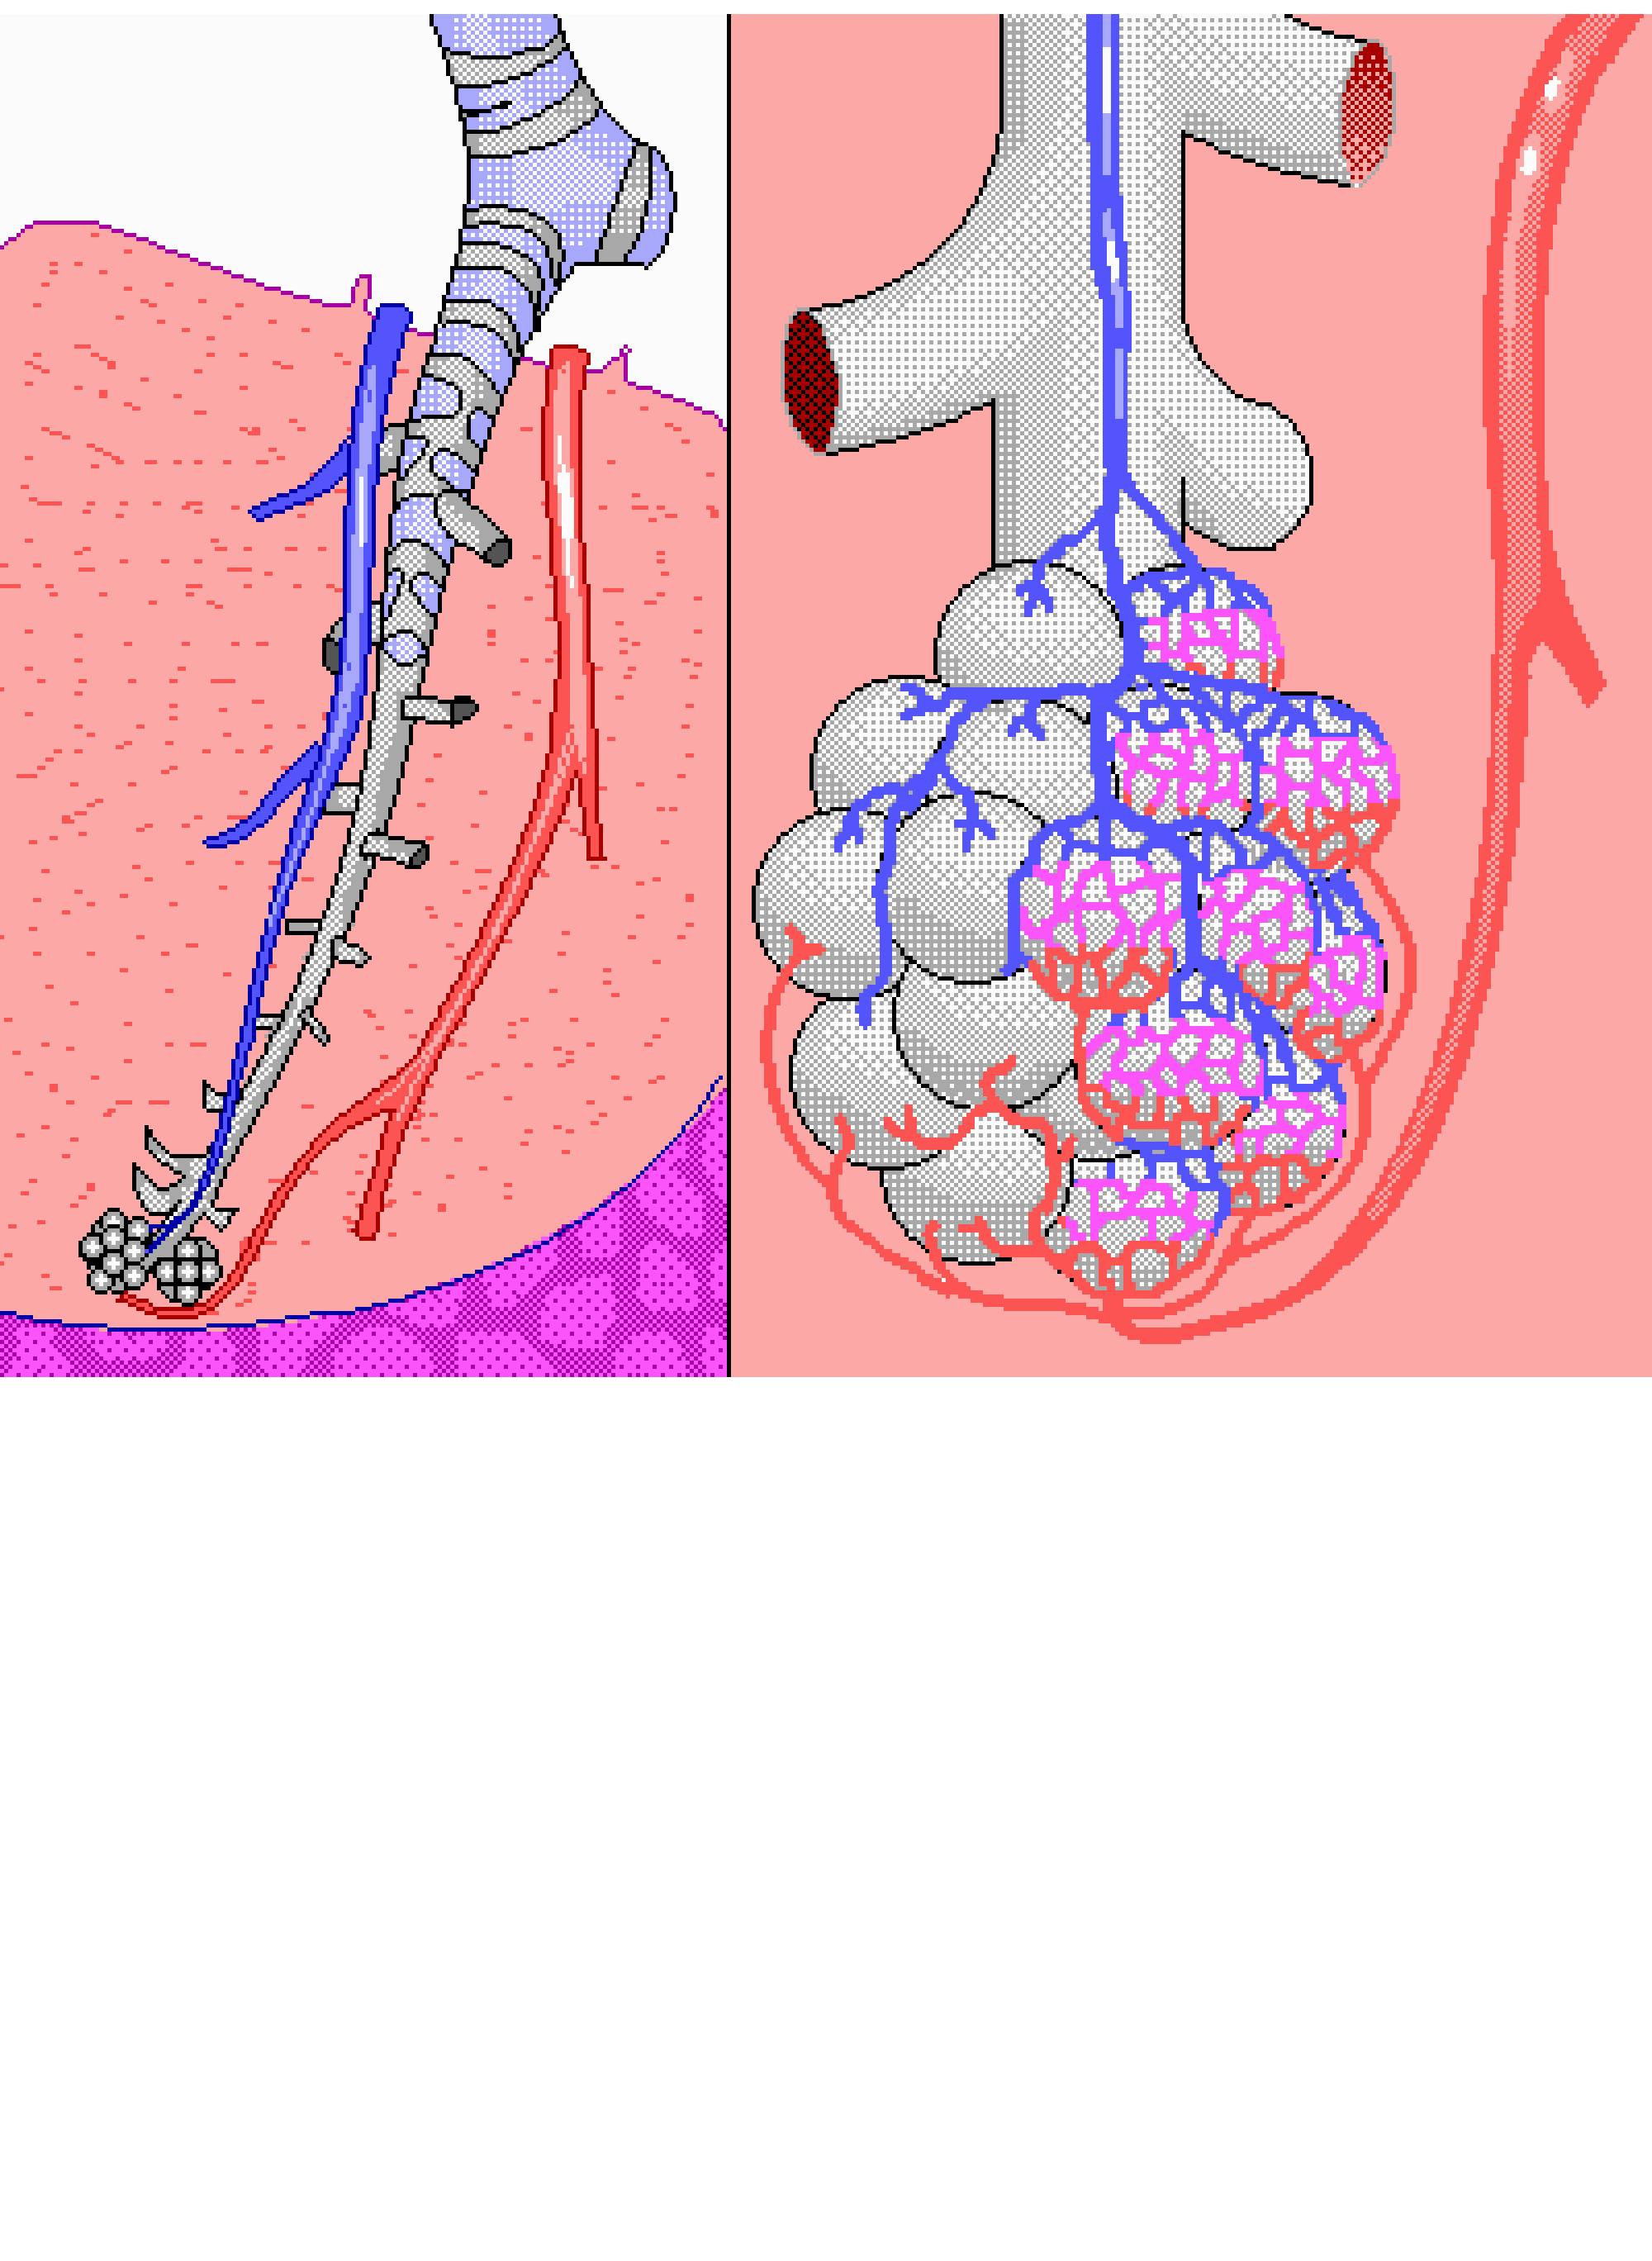 Terminal Bronchi and Alveoli - Anatomy Pictures and Information